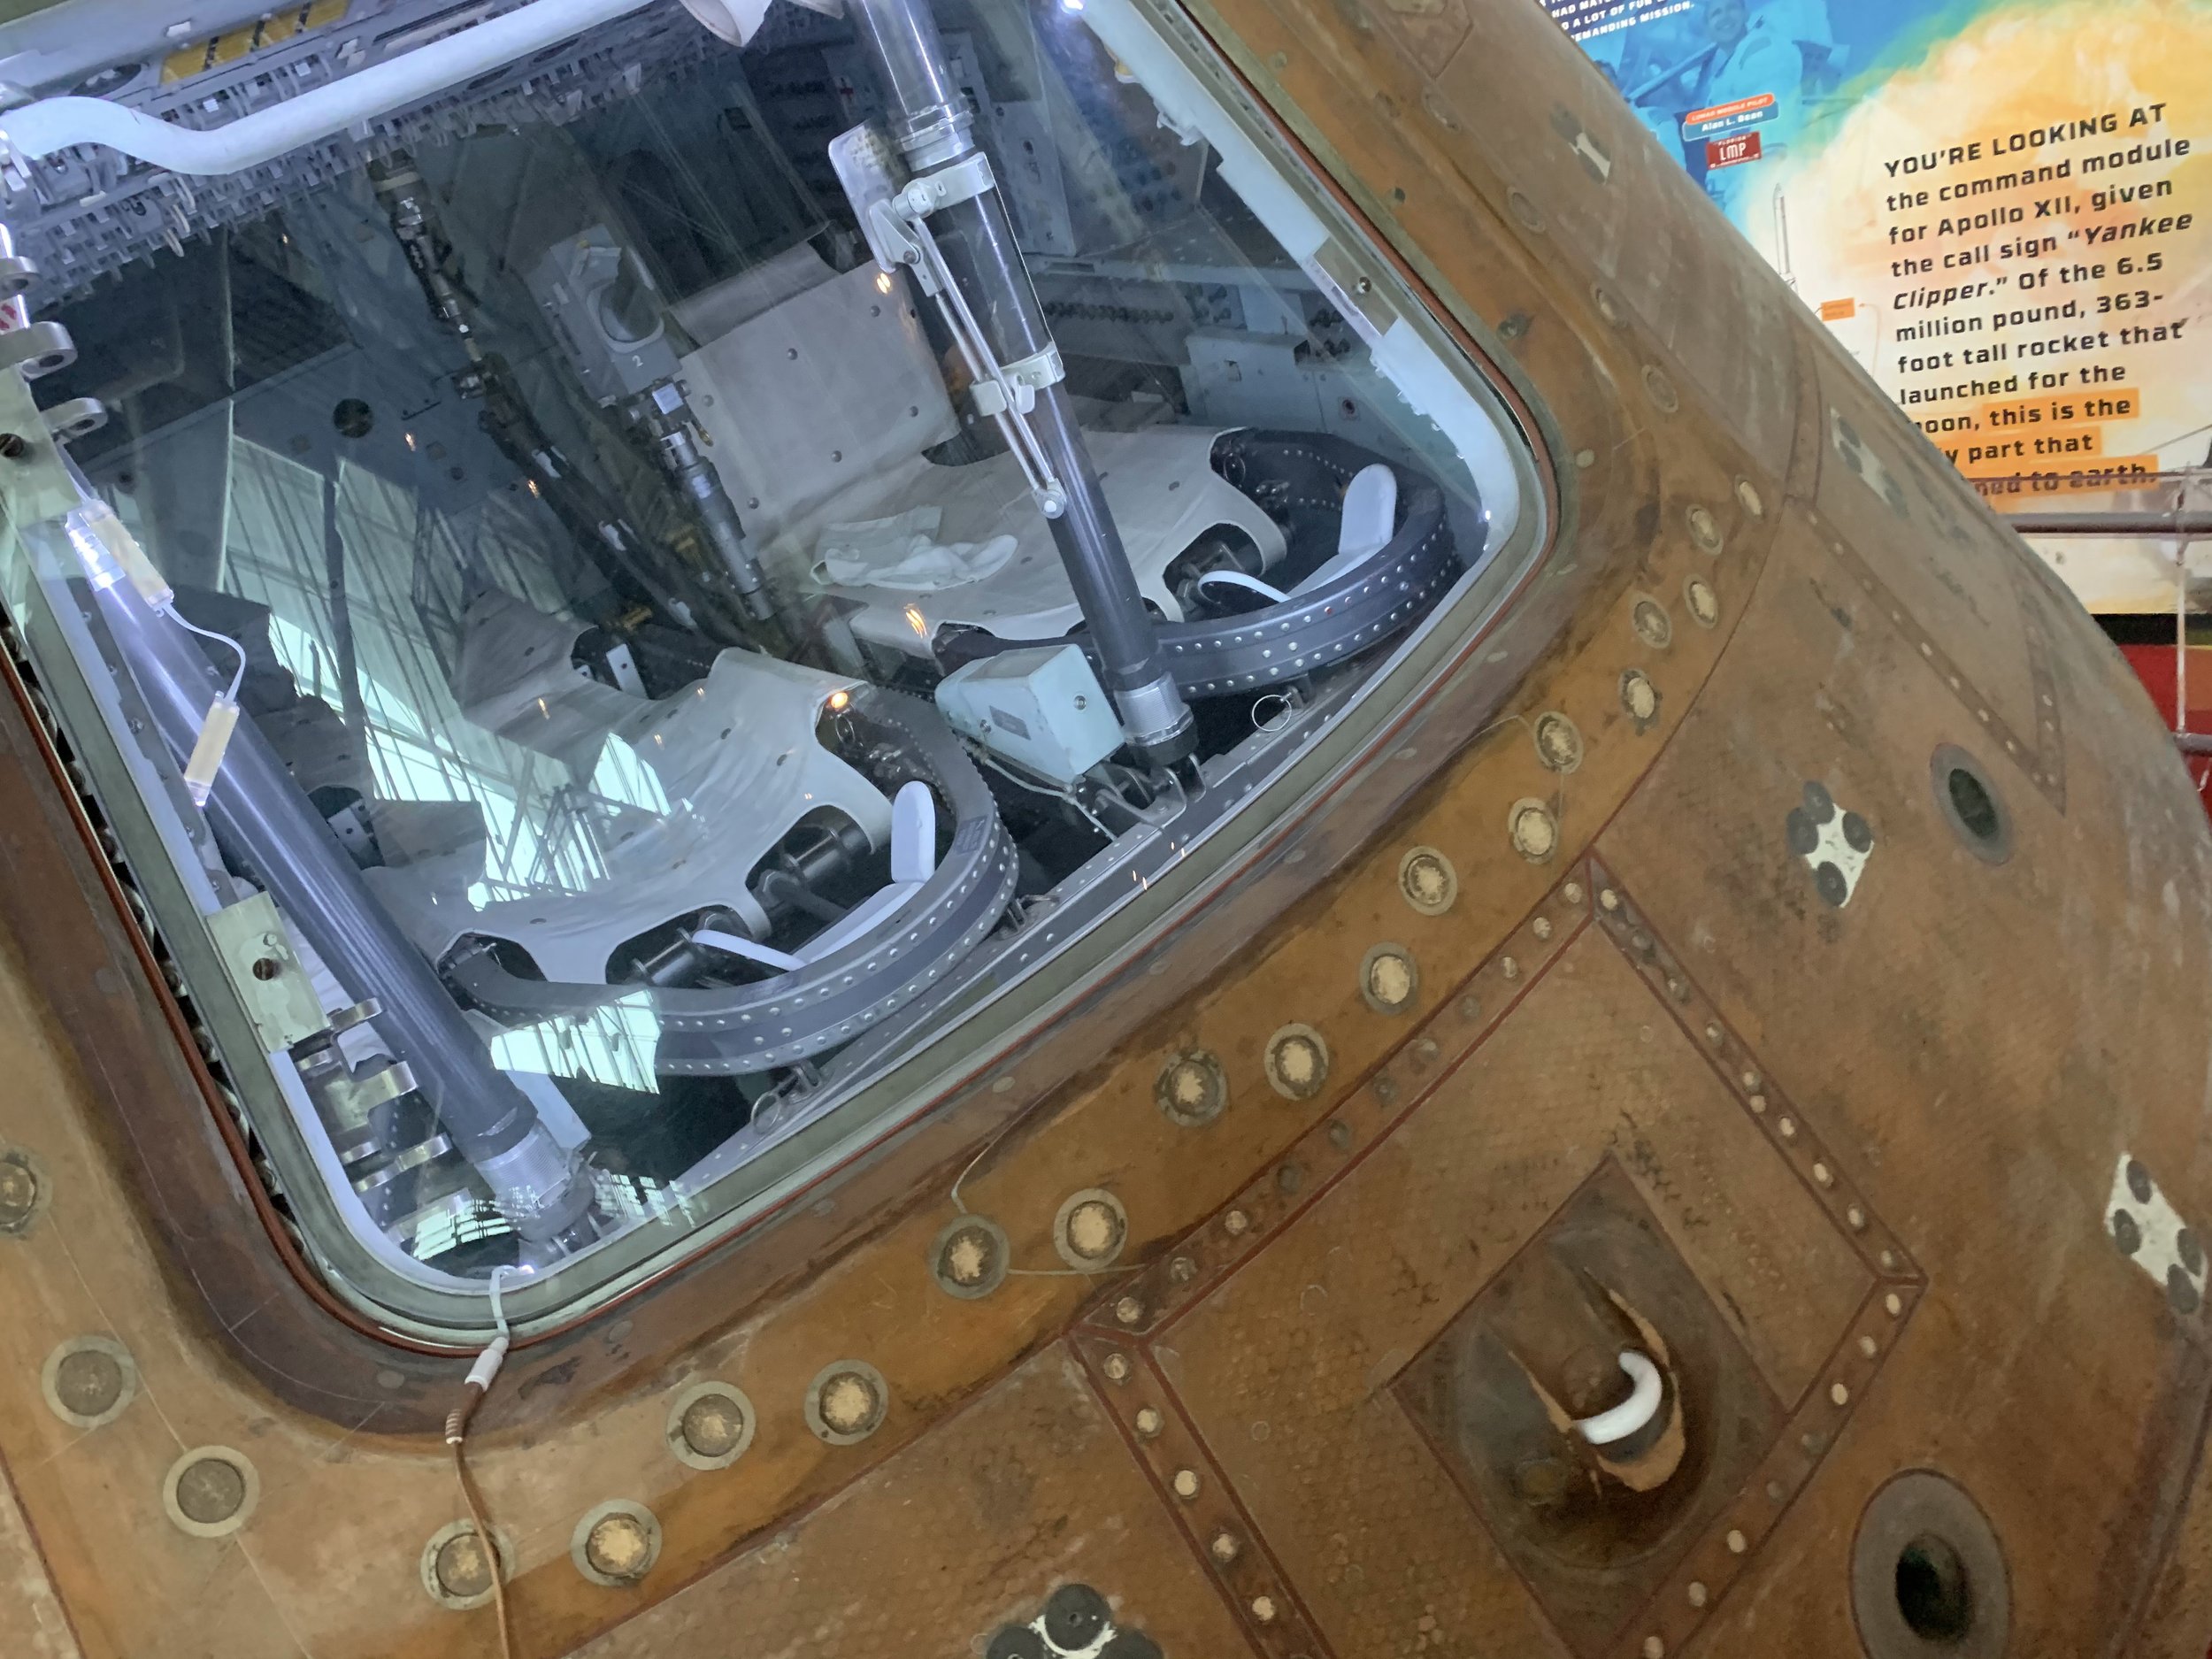 Looking in at the Astronaut's Seats